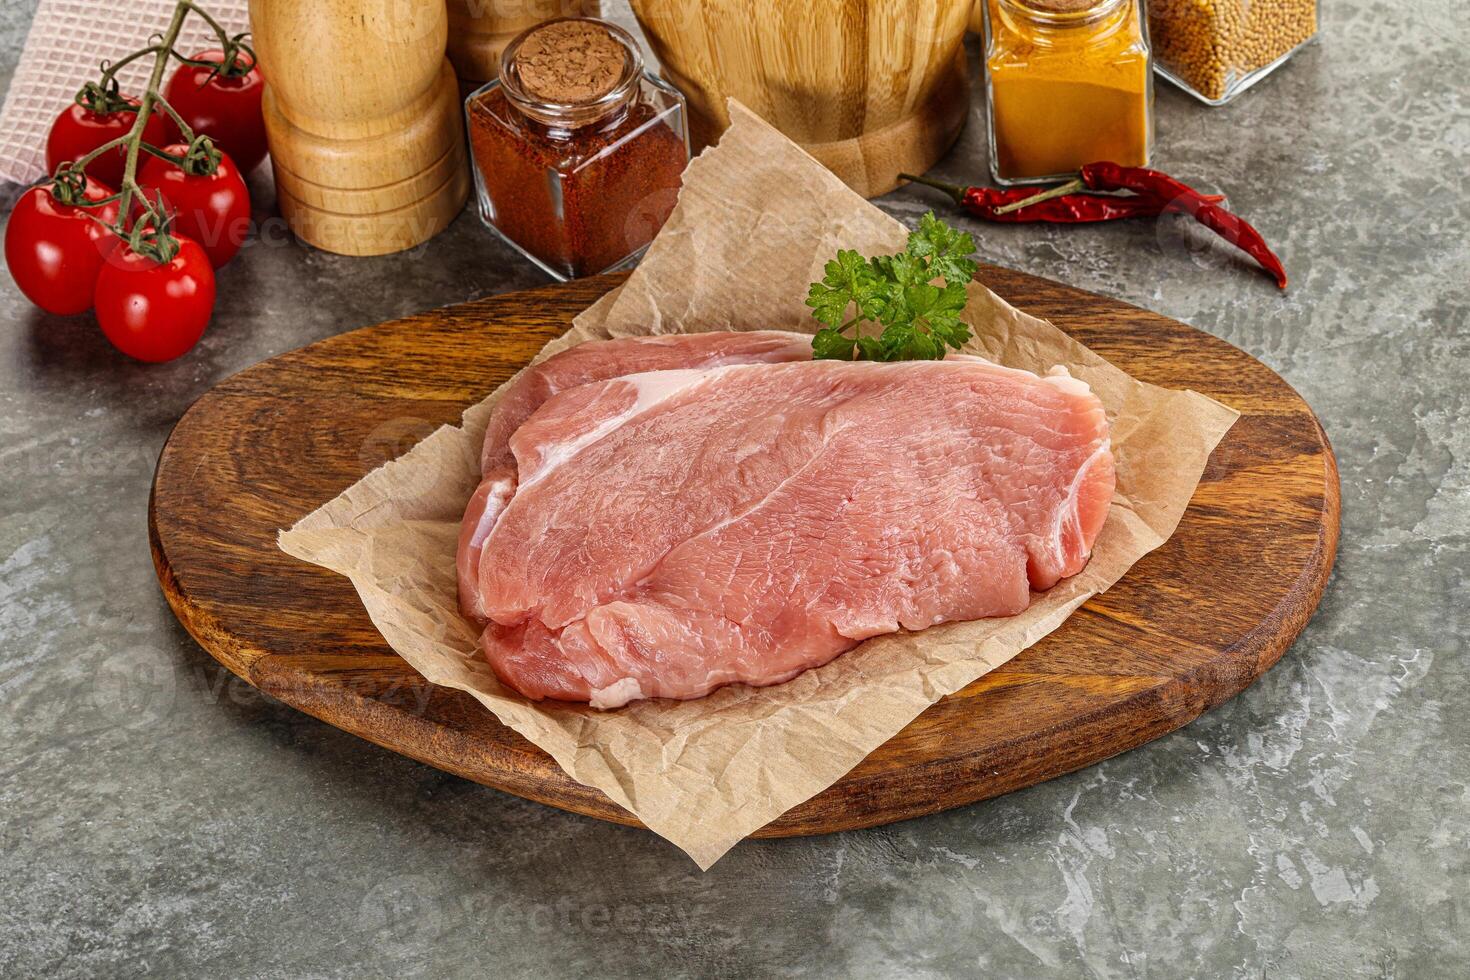 Raw pork schnitzel for cooking photo